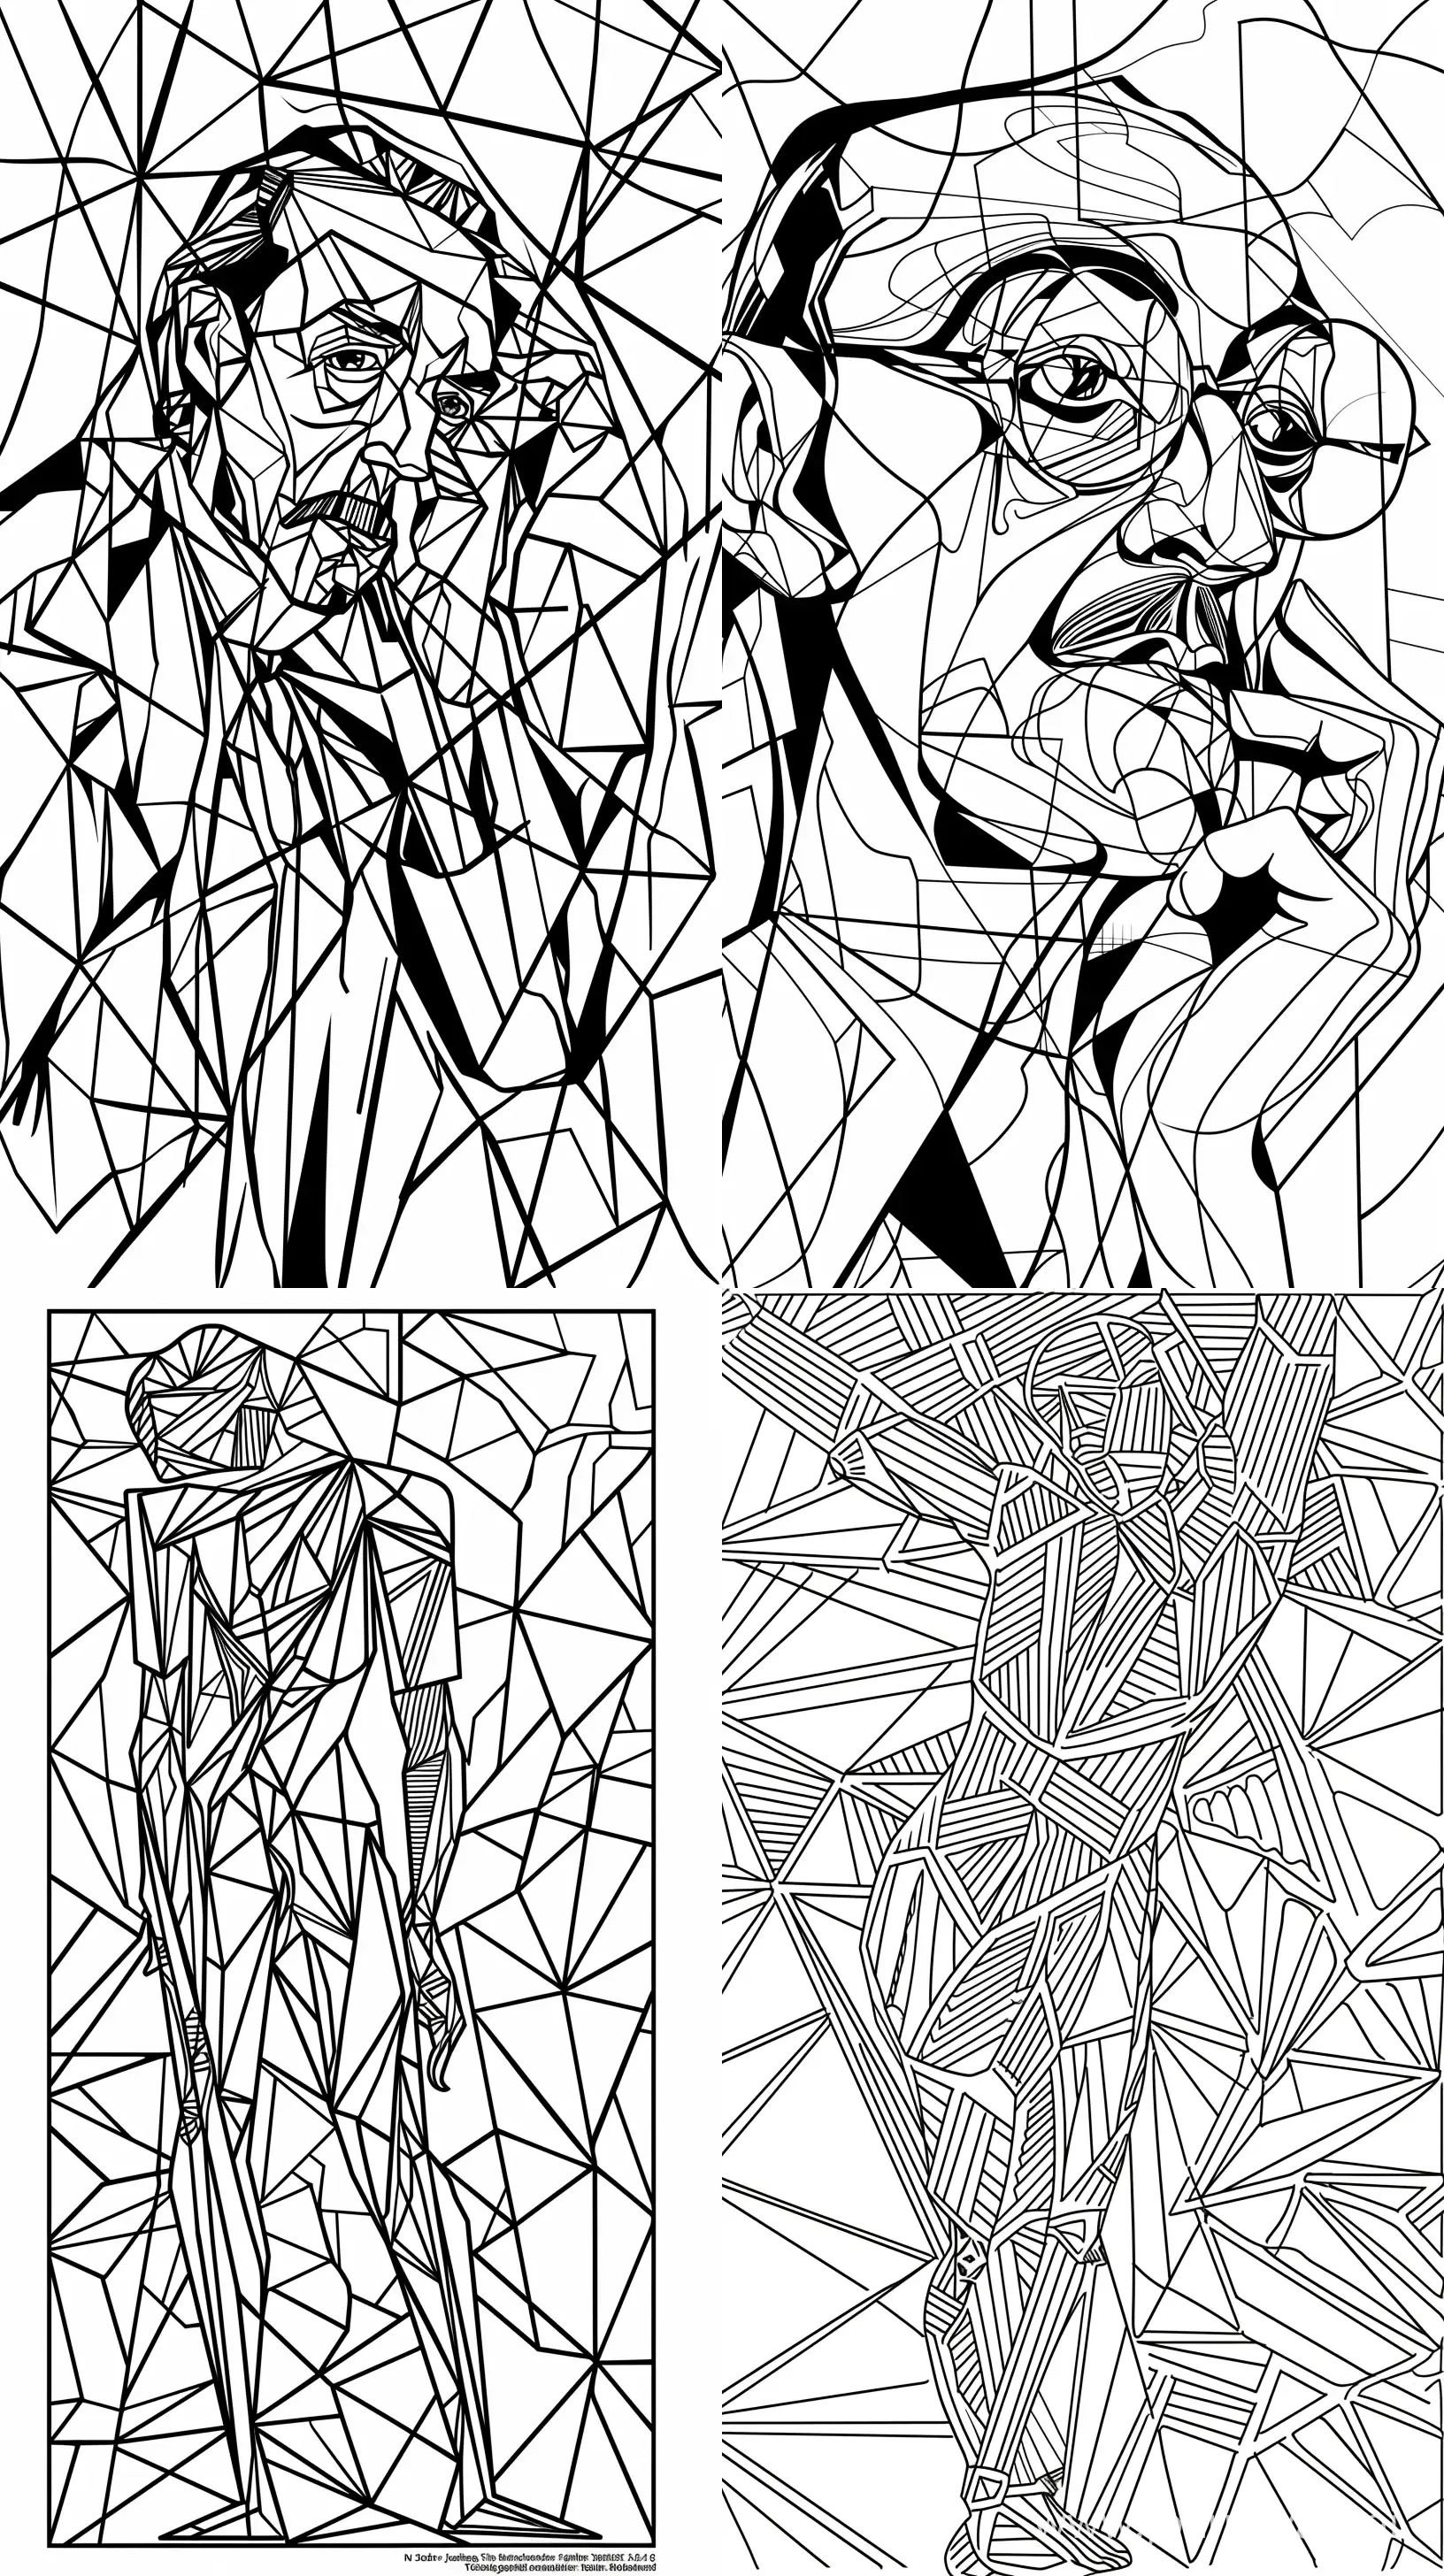 Surrealistic-Monochrome-Coloring-Page-Salvador-Dali-Inspired-Art-with-Geometric-Background